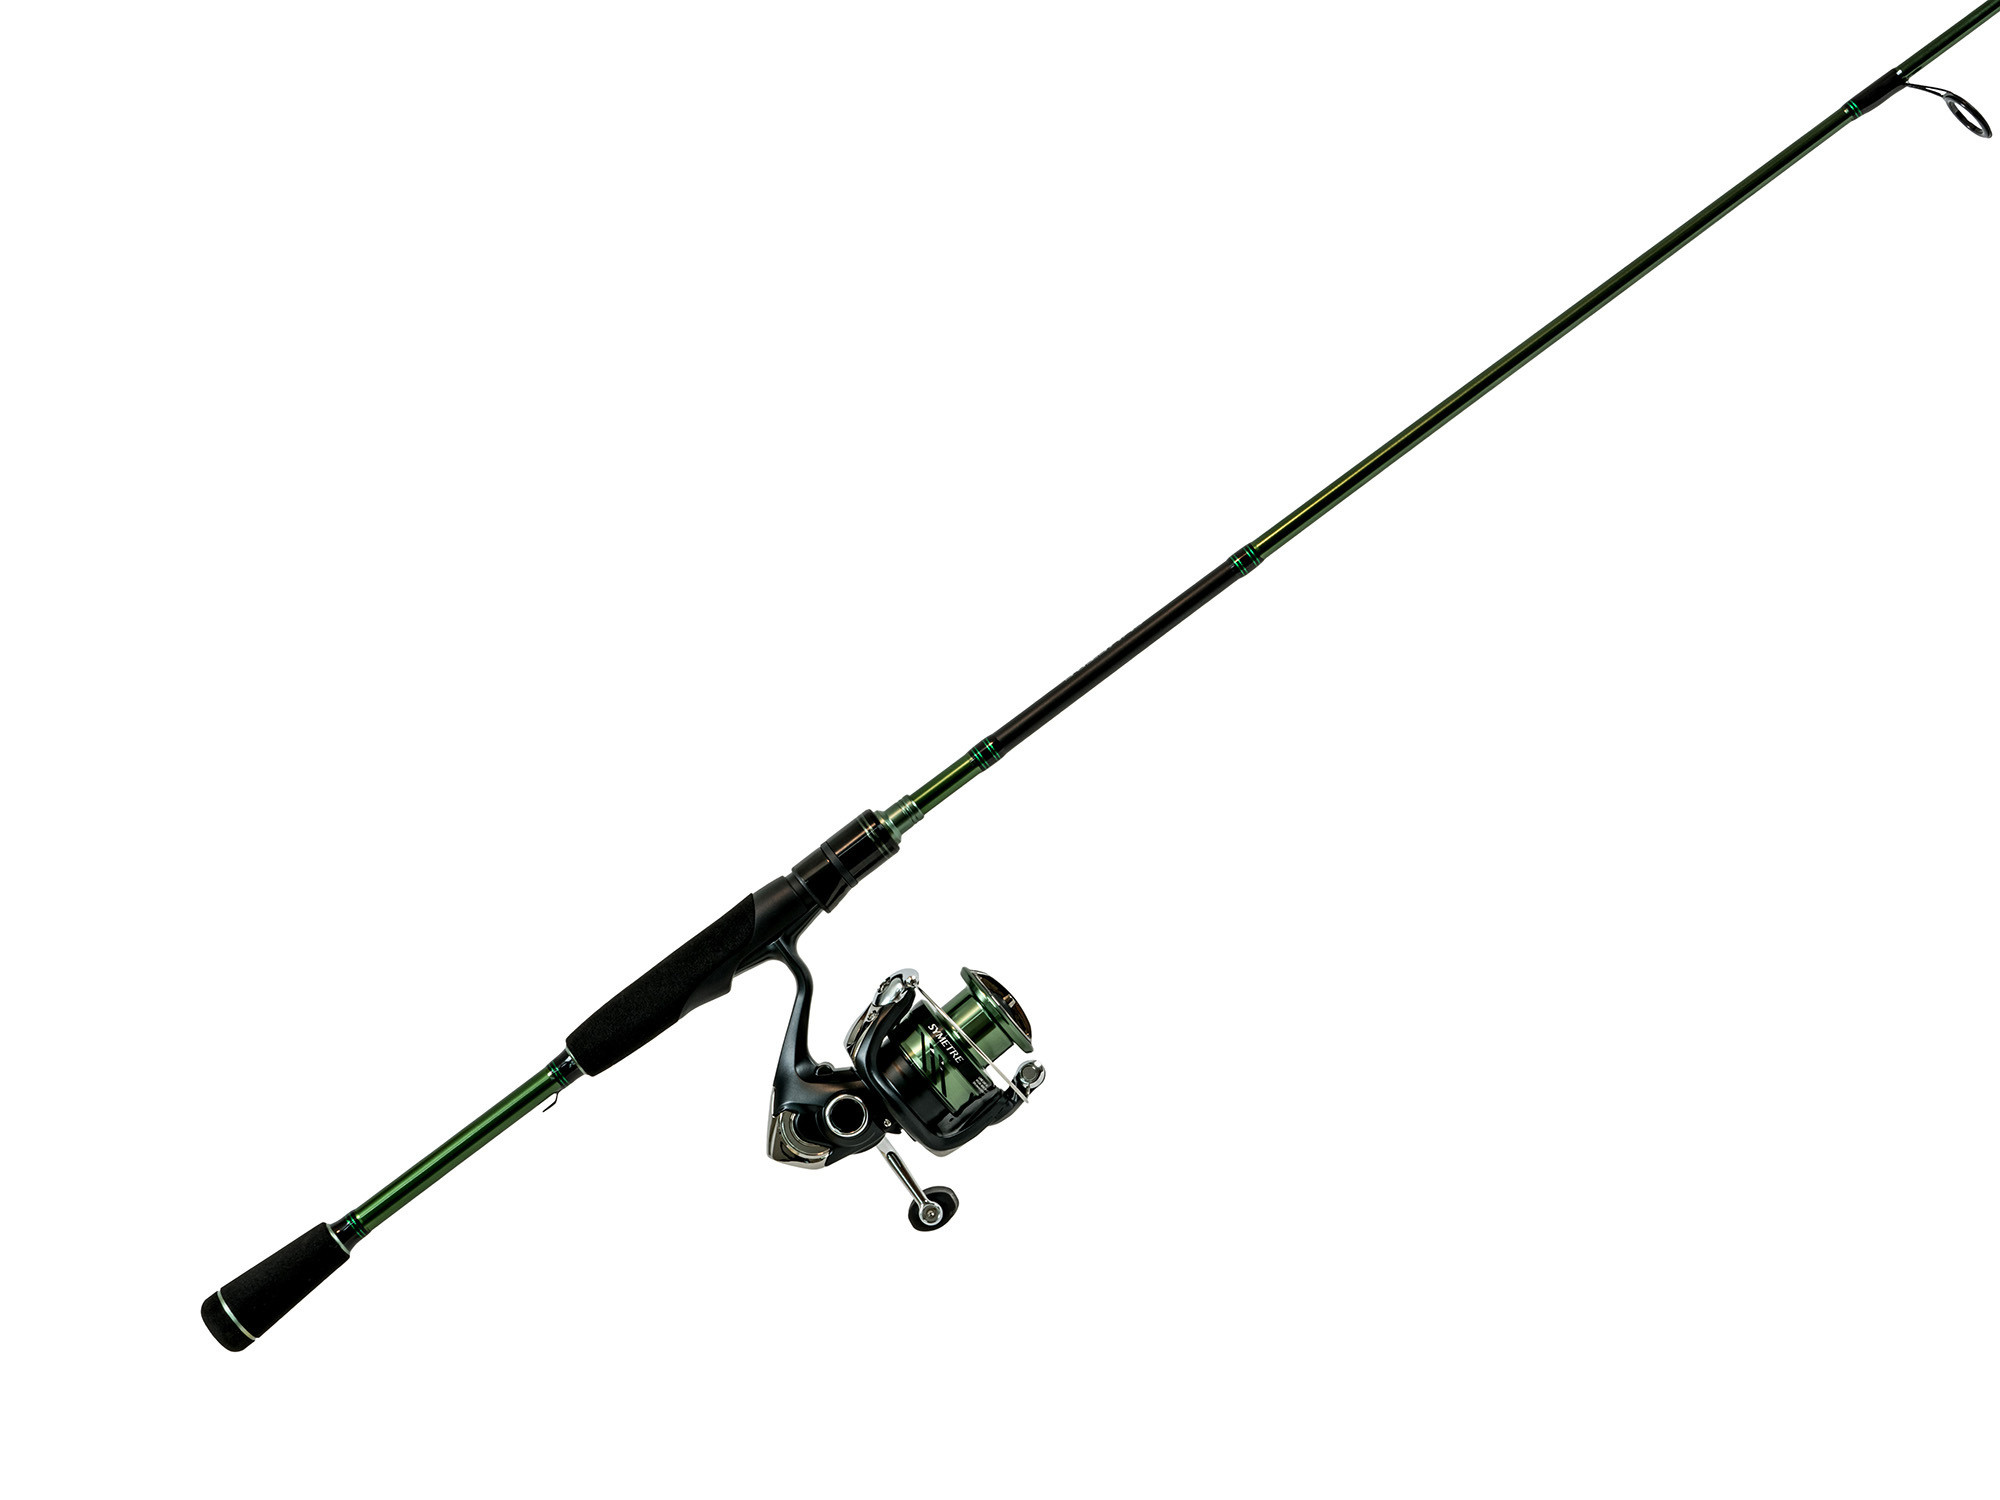 Symetre Fishing Pole Discounted Buy